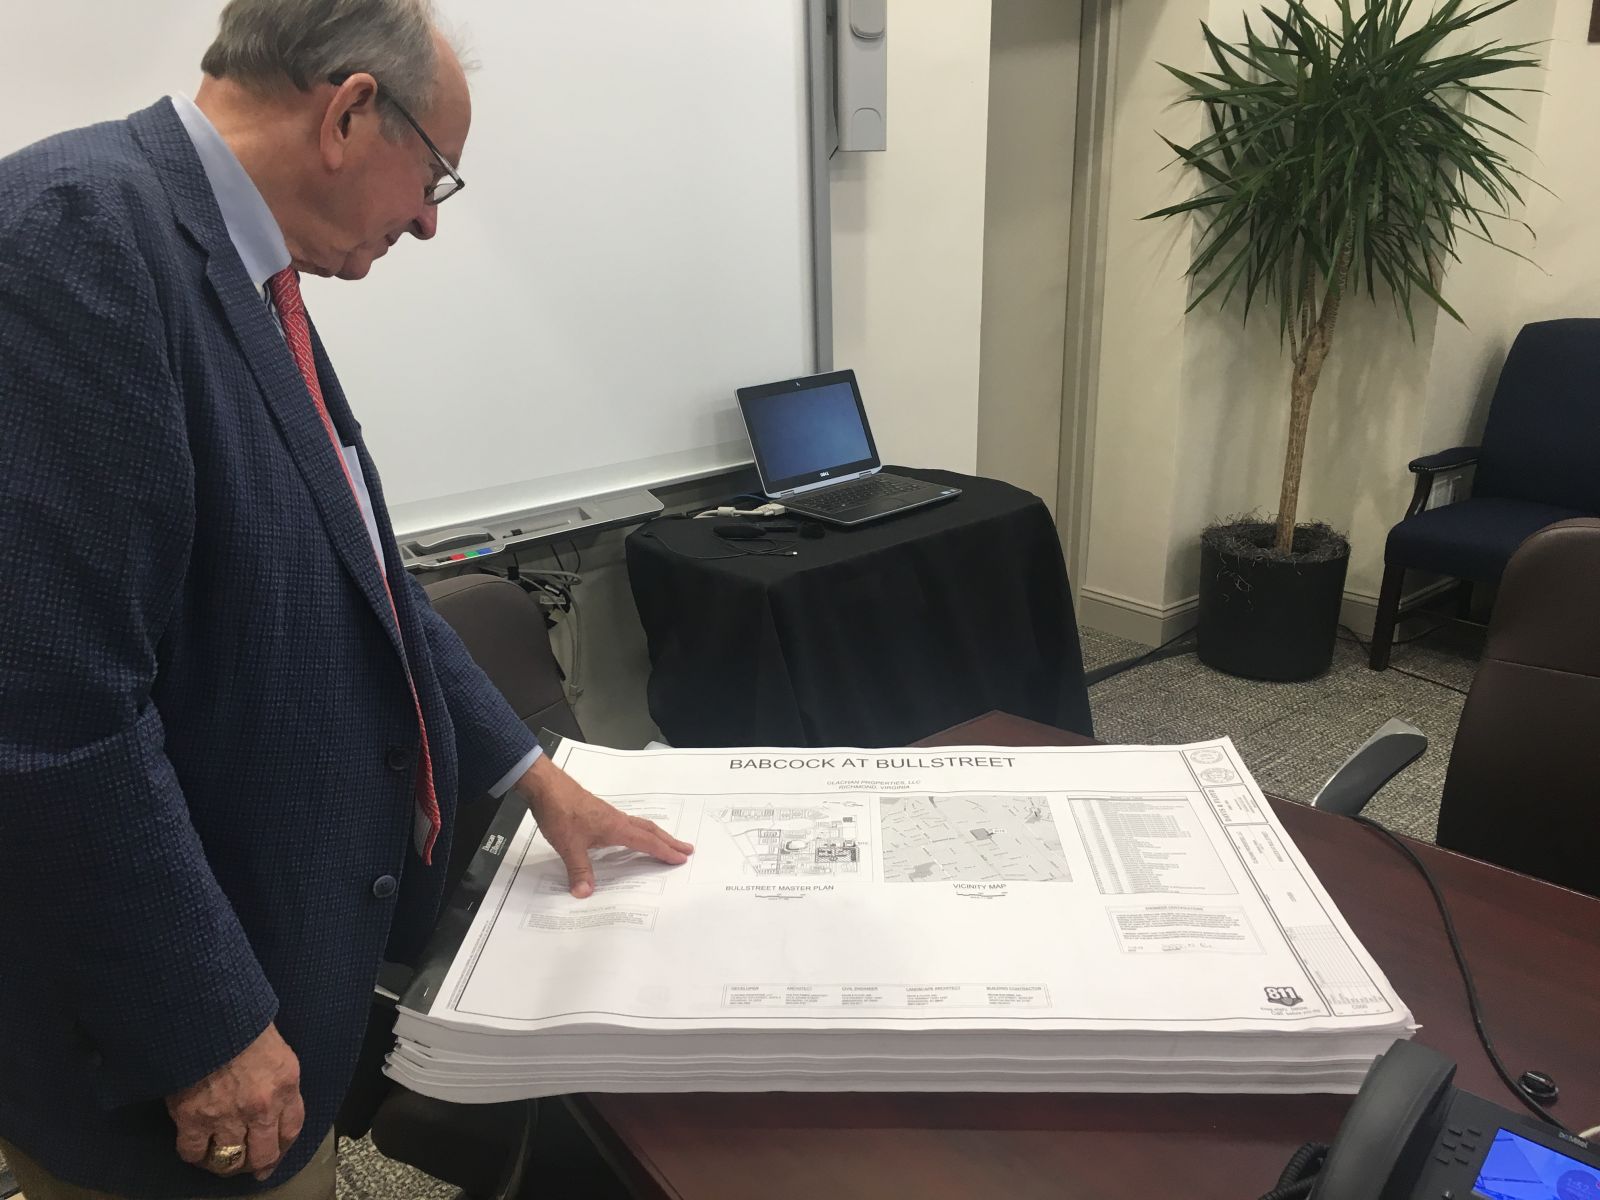 Columbia City Councilman Howard Duvall, chair of the Bull Street commission, examines plans for luxury apartments at the Babcock building in the BullStreet District. (Photo/RenÃ©e  Sexton)